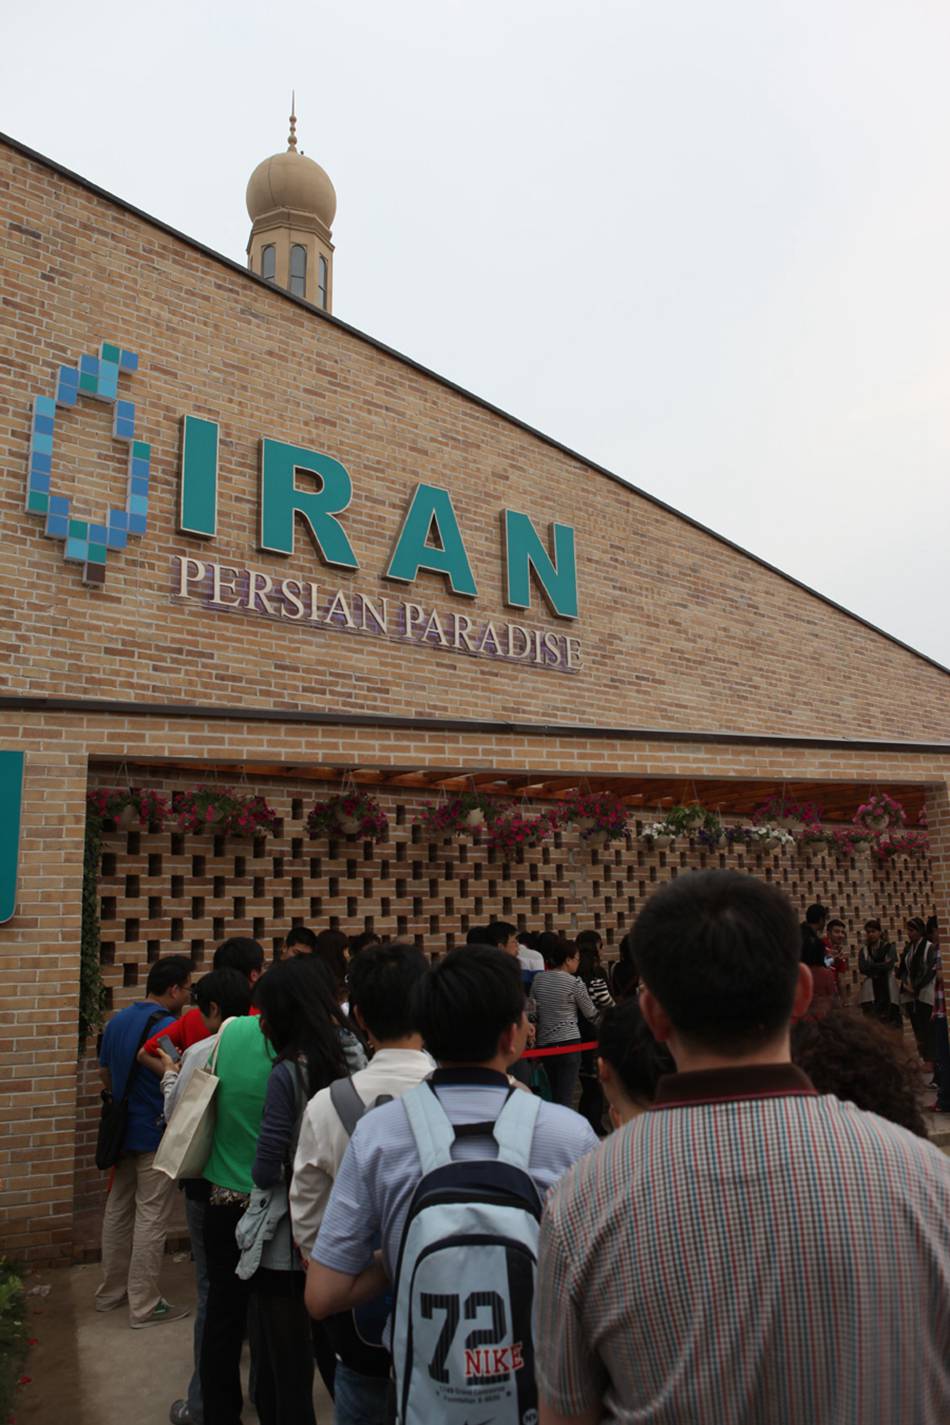 People line up to enter Iran's Persian Paradise at the opening of the Ninth China (Beijing) International Garden Expo on Saturday, May 18, 2013. The expo will last for six months. [Photo: CRIENGLISH.com / Luo Dan]